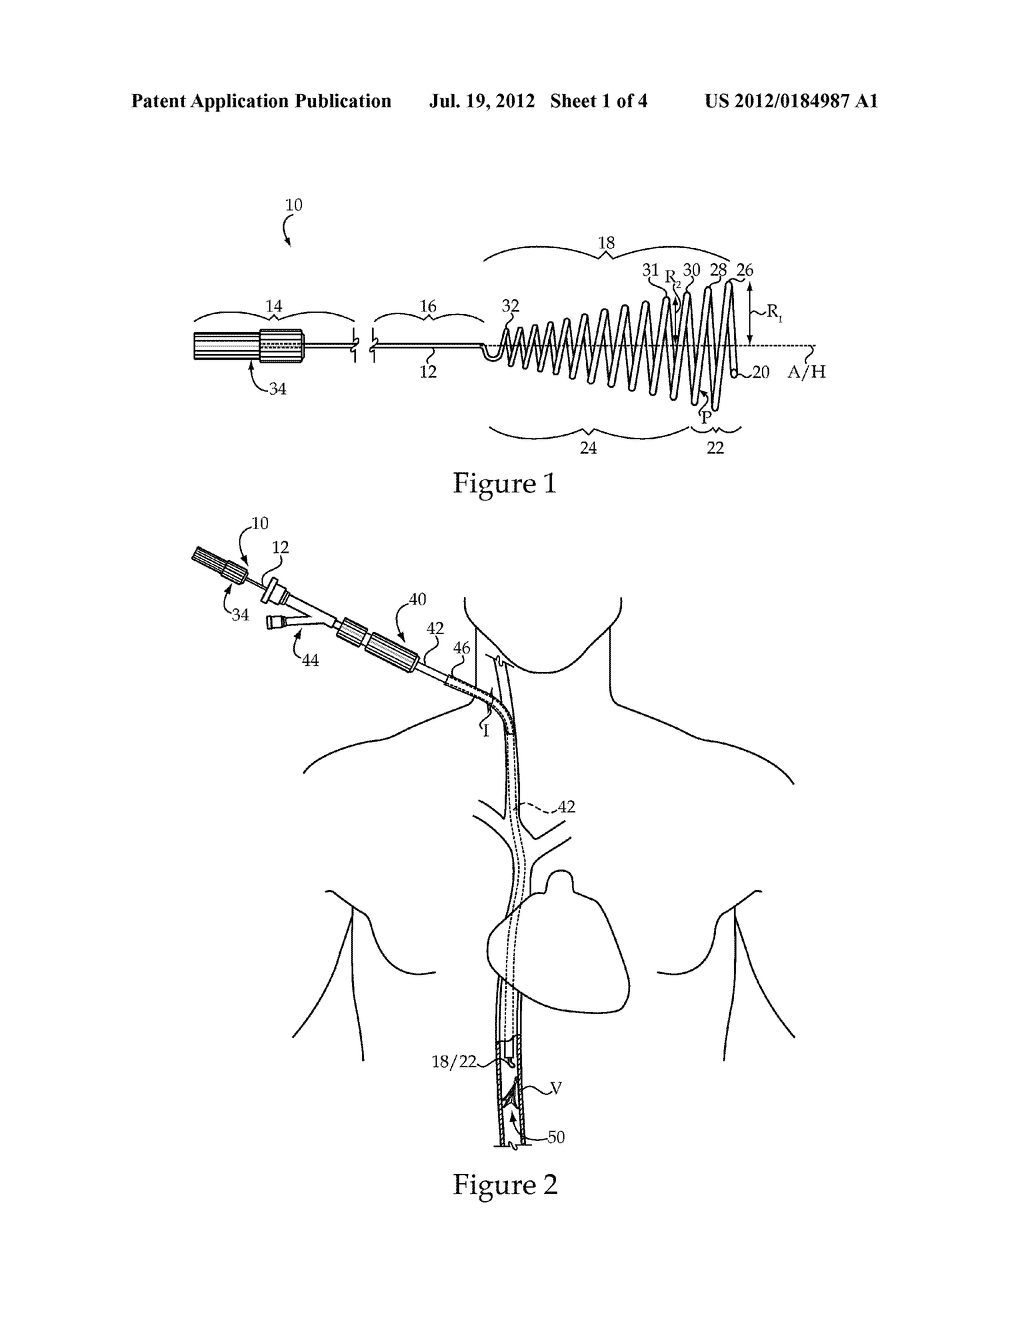 Vascular Implant Retrieval Method, Retrieval Assembly And Tool For Same - diagram, schematic, and image 02